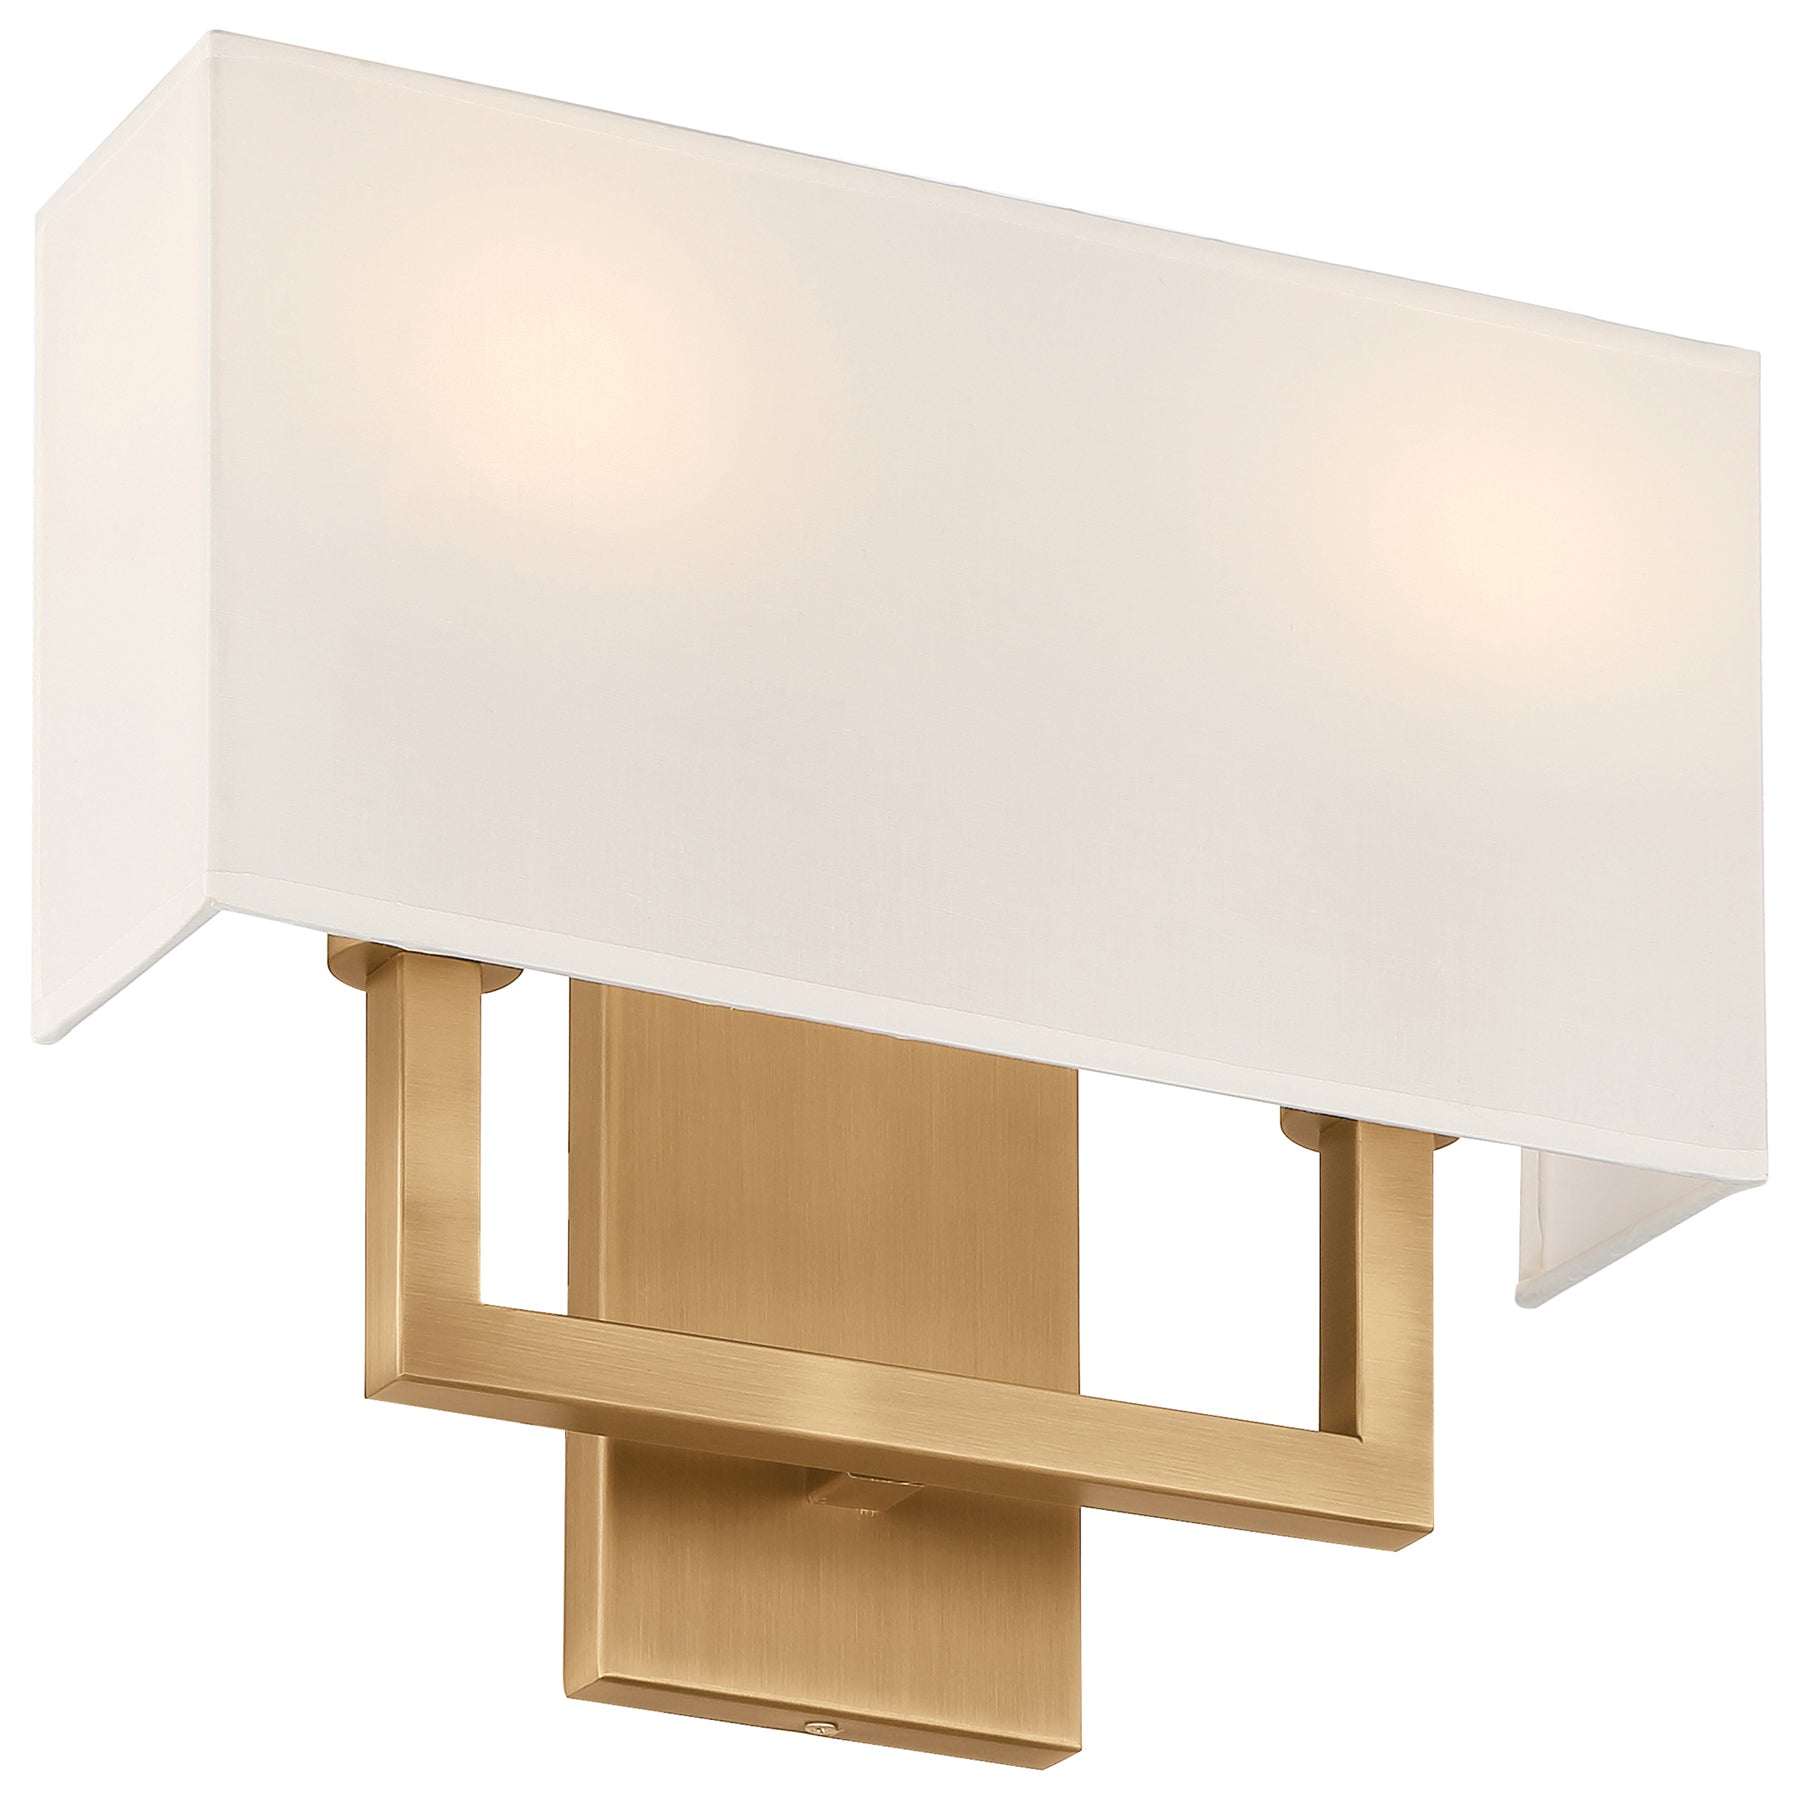  View details for Mid Town 15in. LED Lighting Wall Sconce (Antique Brushed Brass) Mid Town 15in. LED Lighting Wall Sconce (Antique Brushed Brass)